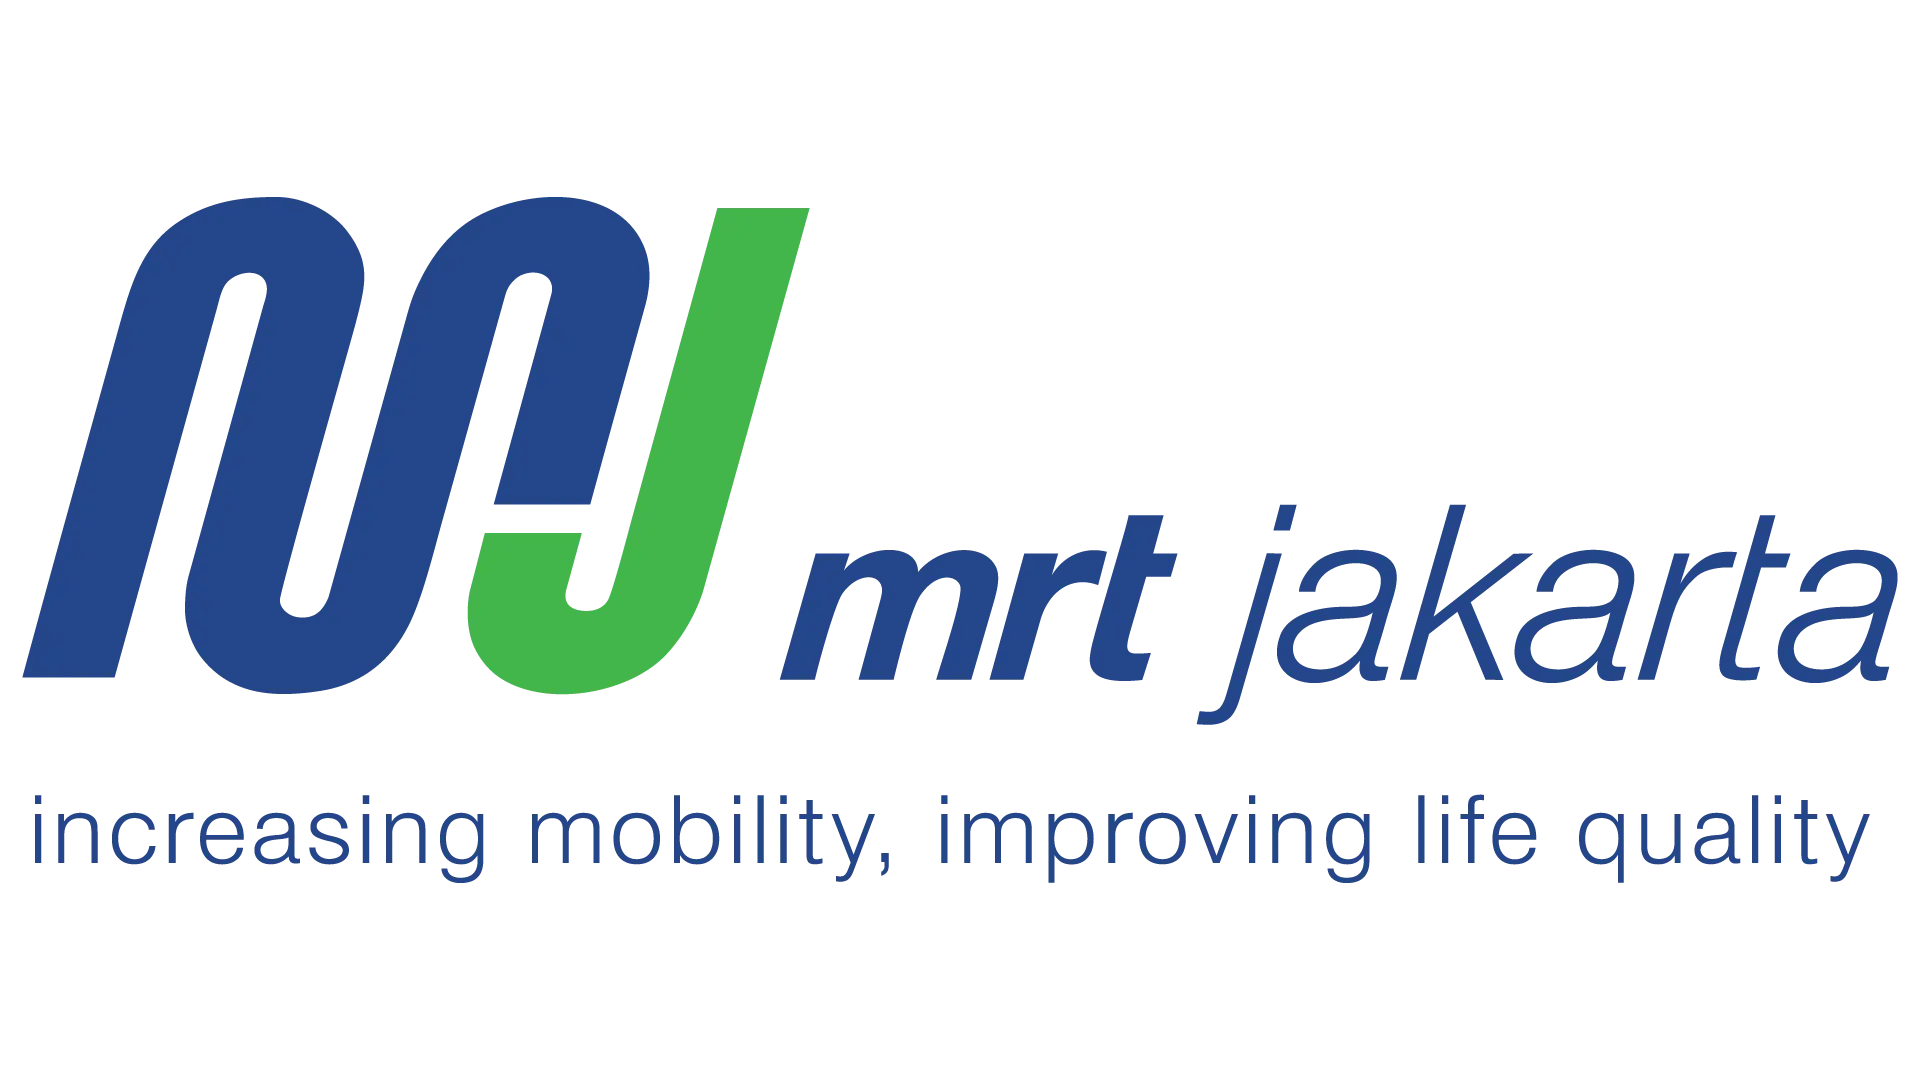 Chatbot in the public transportation industry owned by the MRT Jakarta company